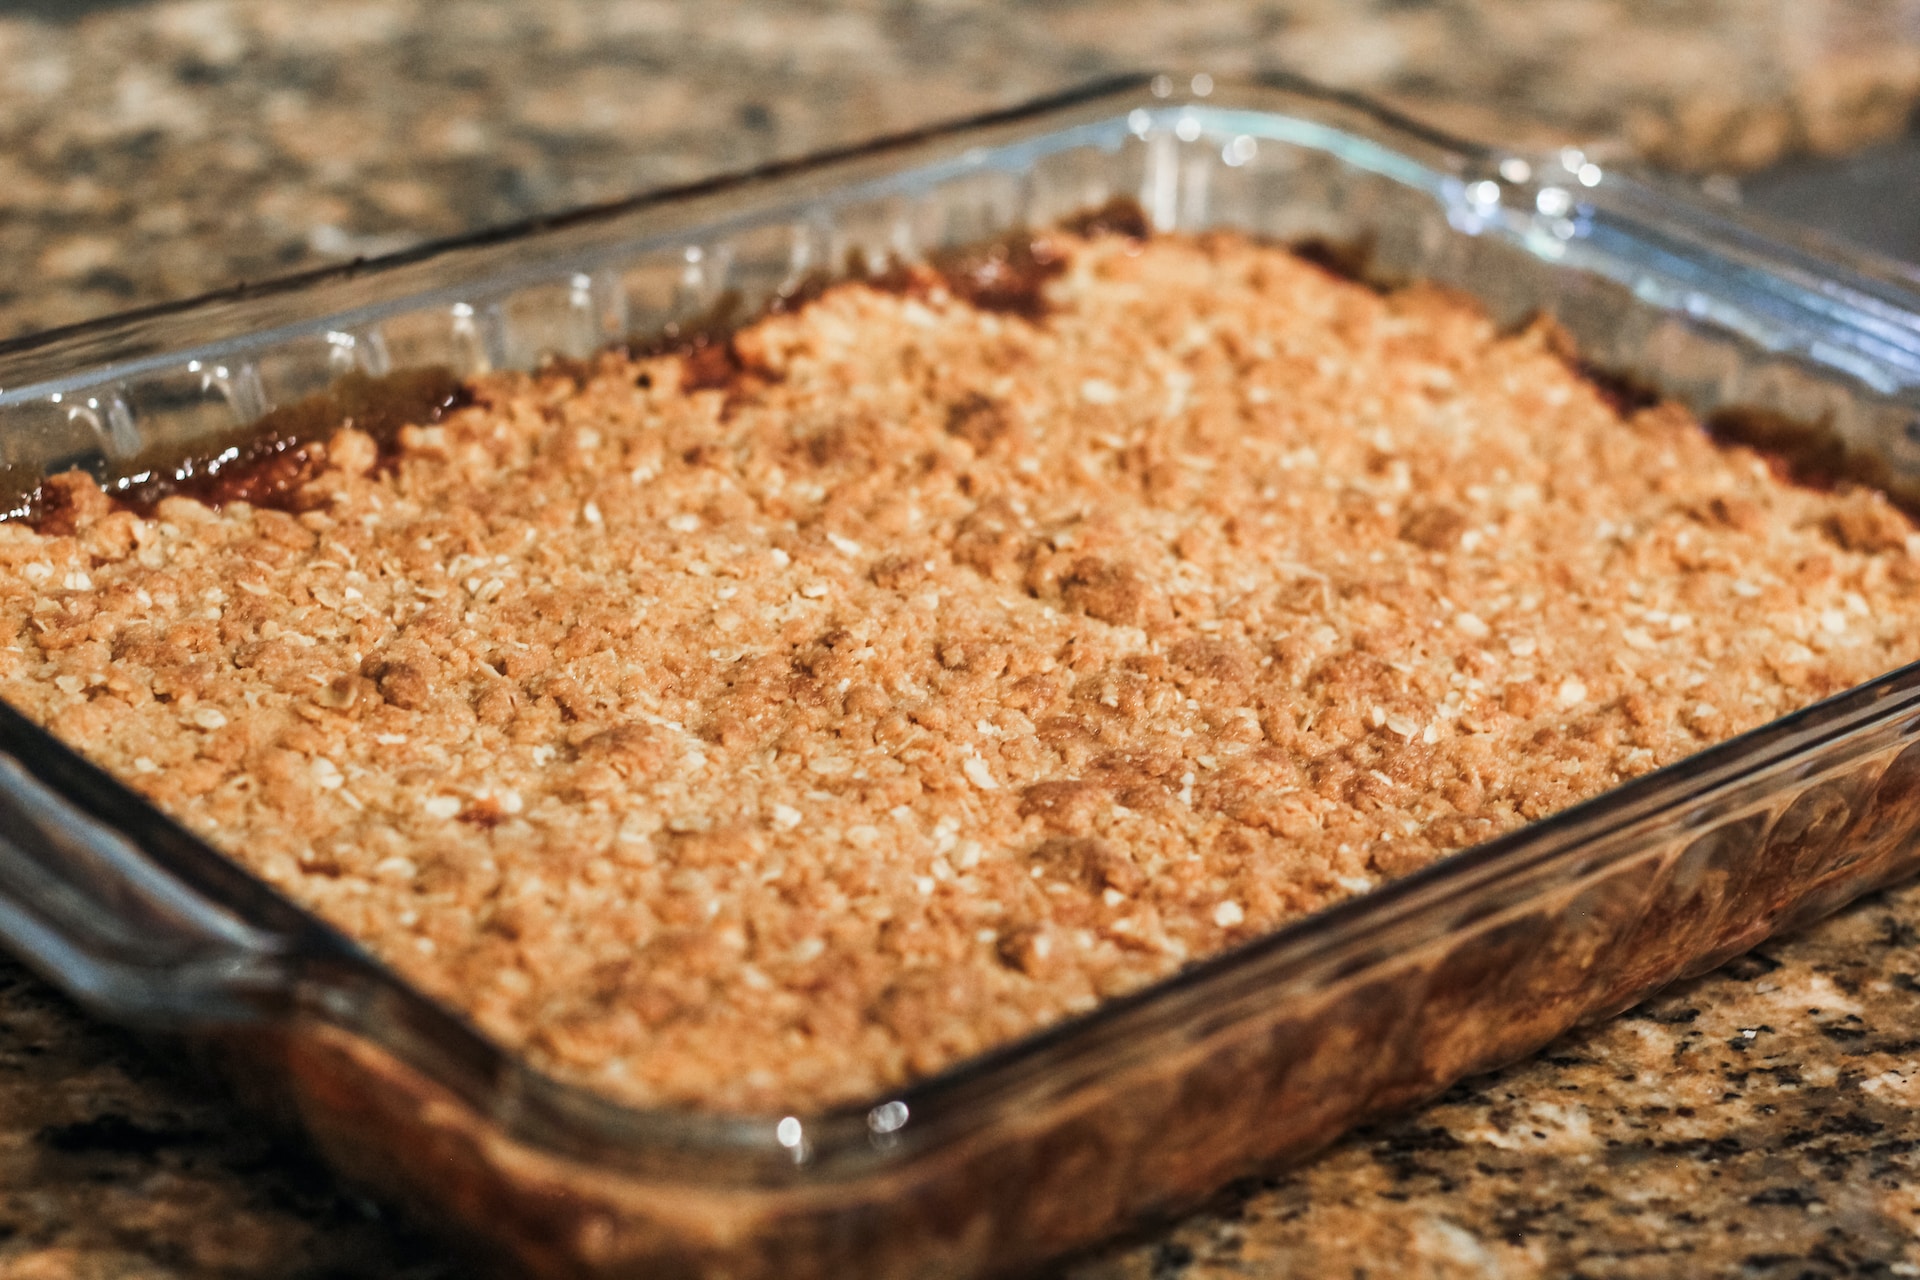 Get the taste of a warm and cozy apple crisp in minutes thanks to this microwave recipe. Just chop an apple and mix with a tablespoon of sugar and 1/2 teaspoon of cinnamon. For the topping, combine 2 tablespoons of oats, 1 tablespoon of flour, 1 tablespoon of brown sugar, and 1 tablespoon of melted butter. Sprinkle over the apple mixture and microwave for 3-4 minutes for a quick apple crisp that's so delightful.